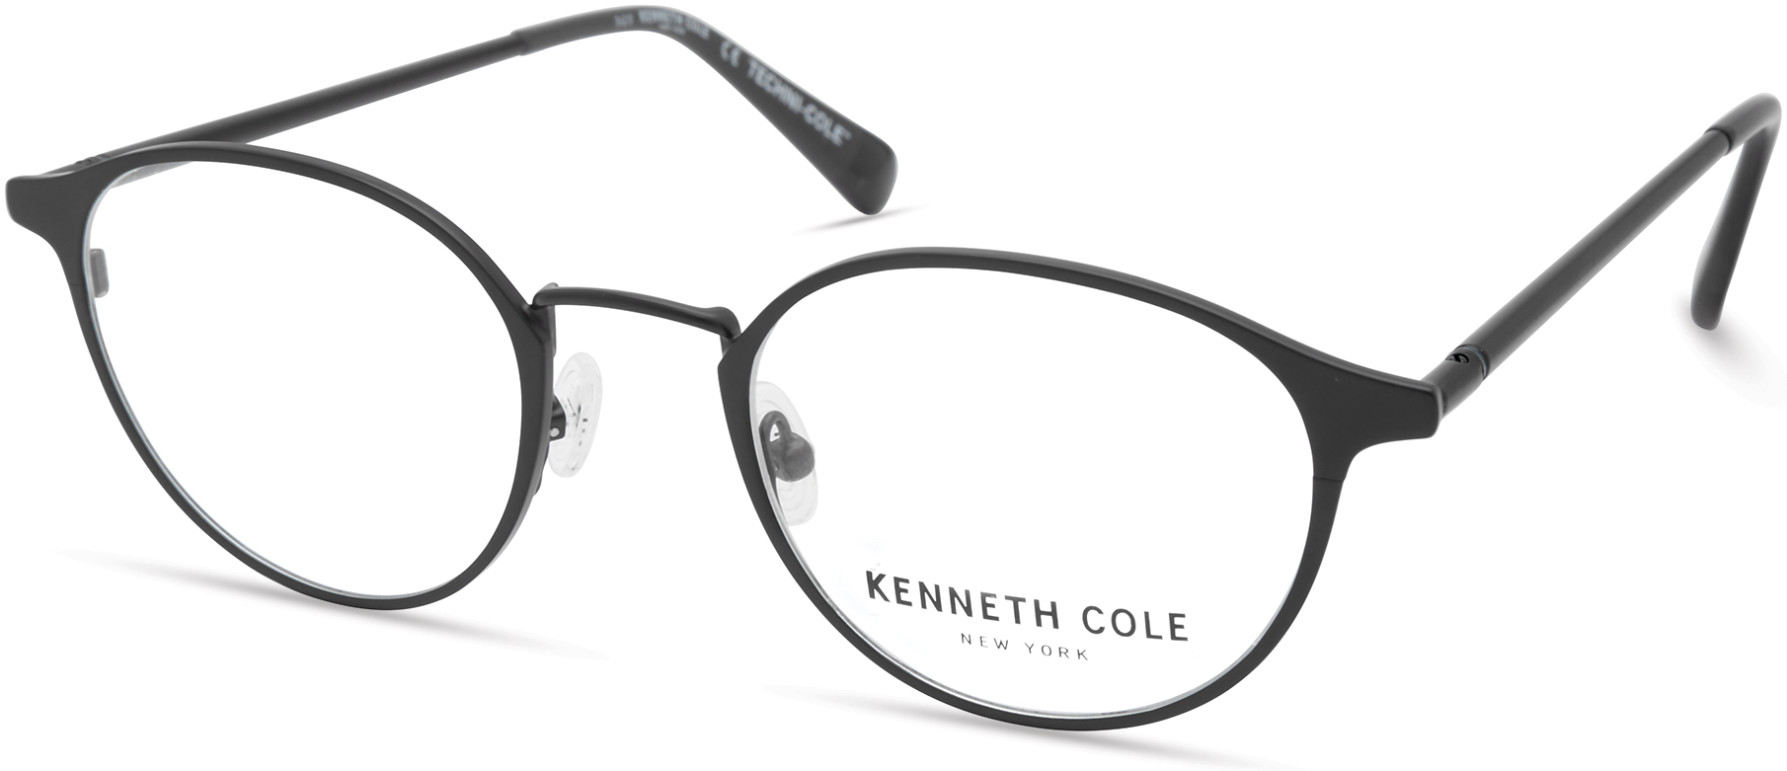 KENNETH COLE NY 0324 002